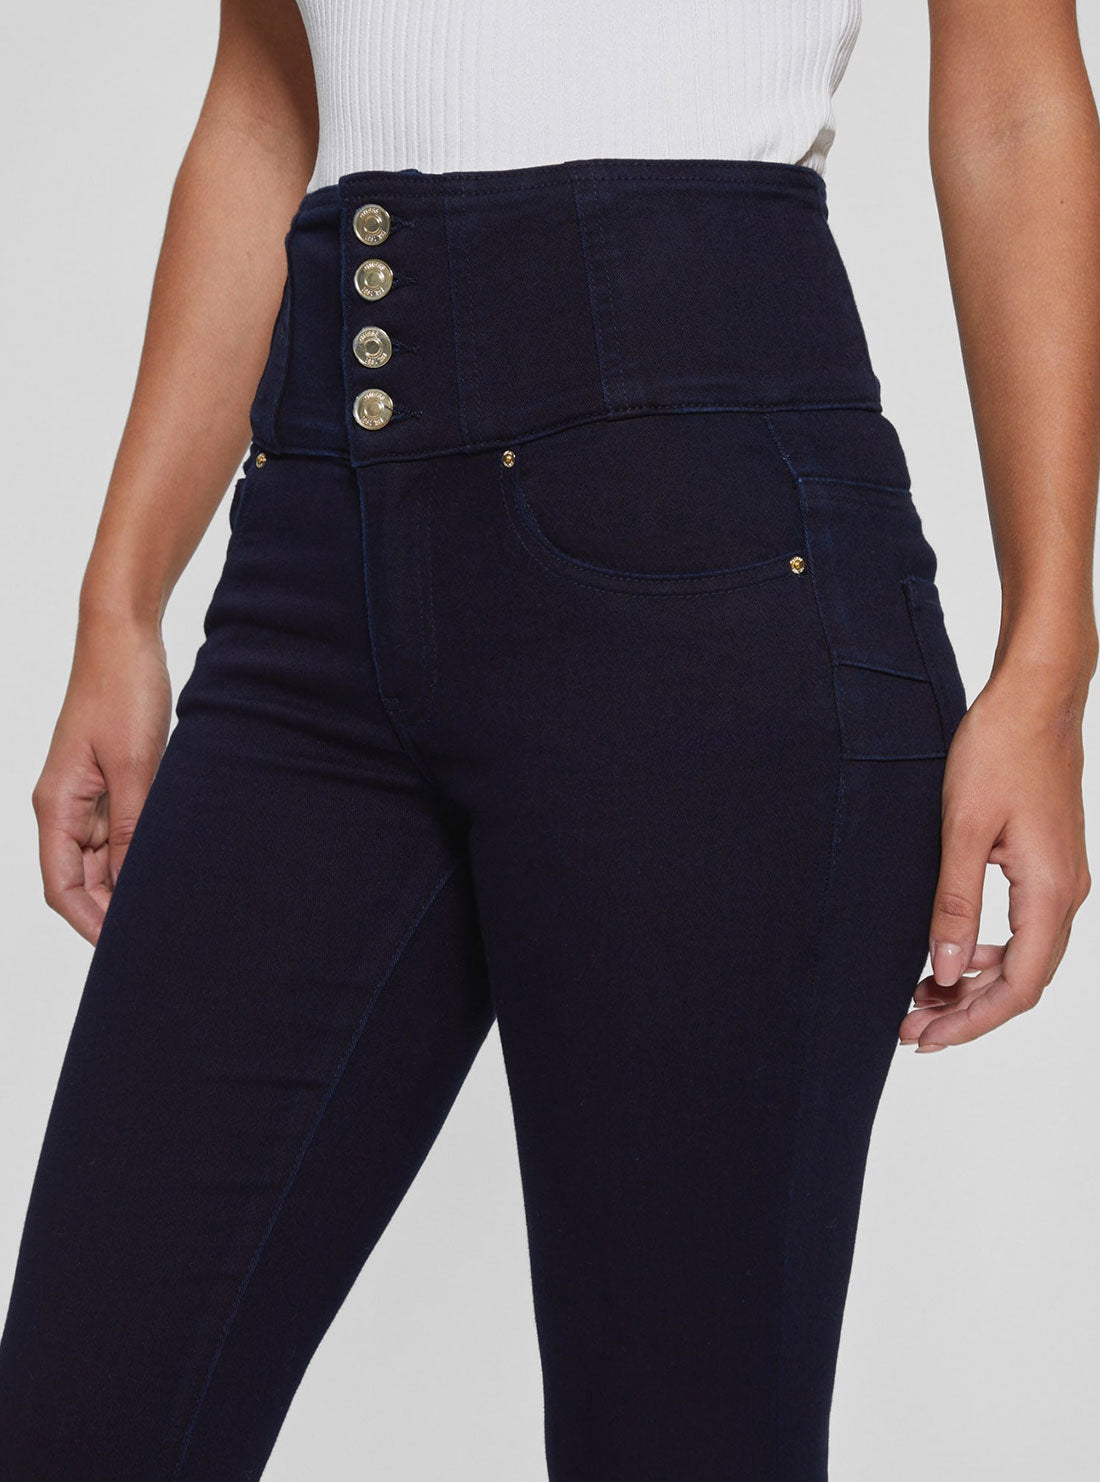 GUESS High-Rise Corset Shape Up Skinny Denim Jeans detail view